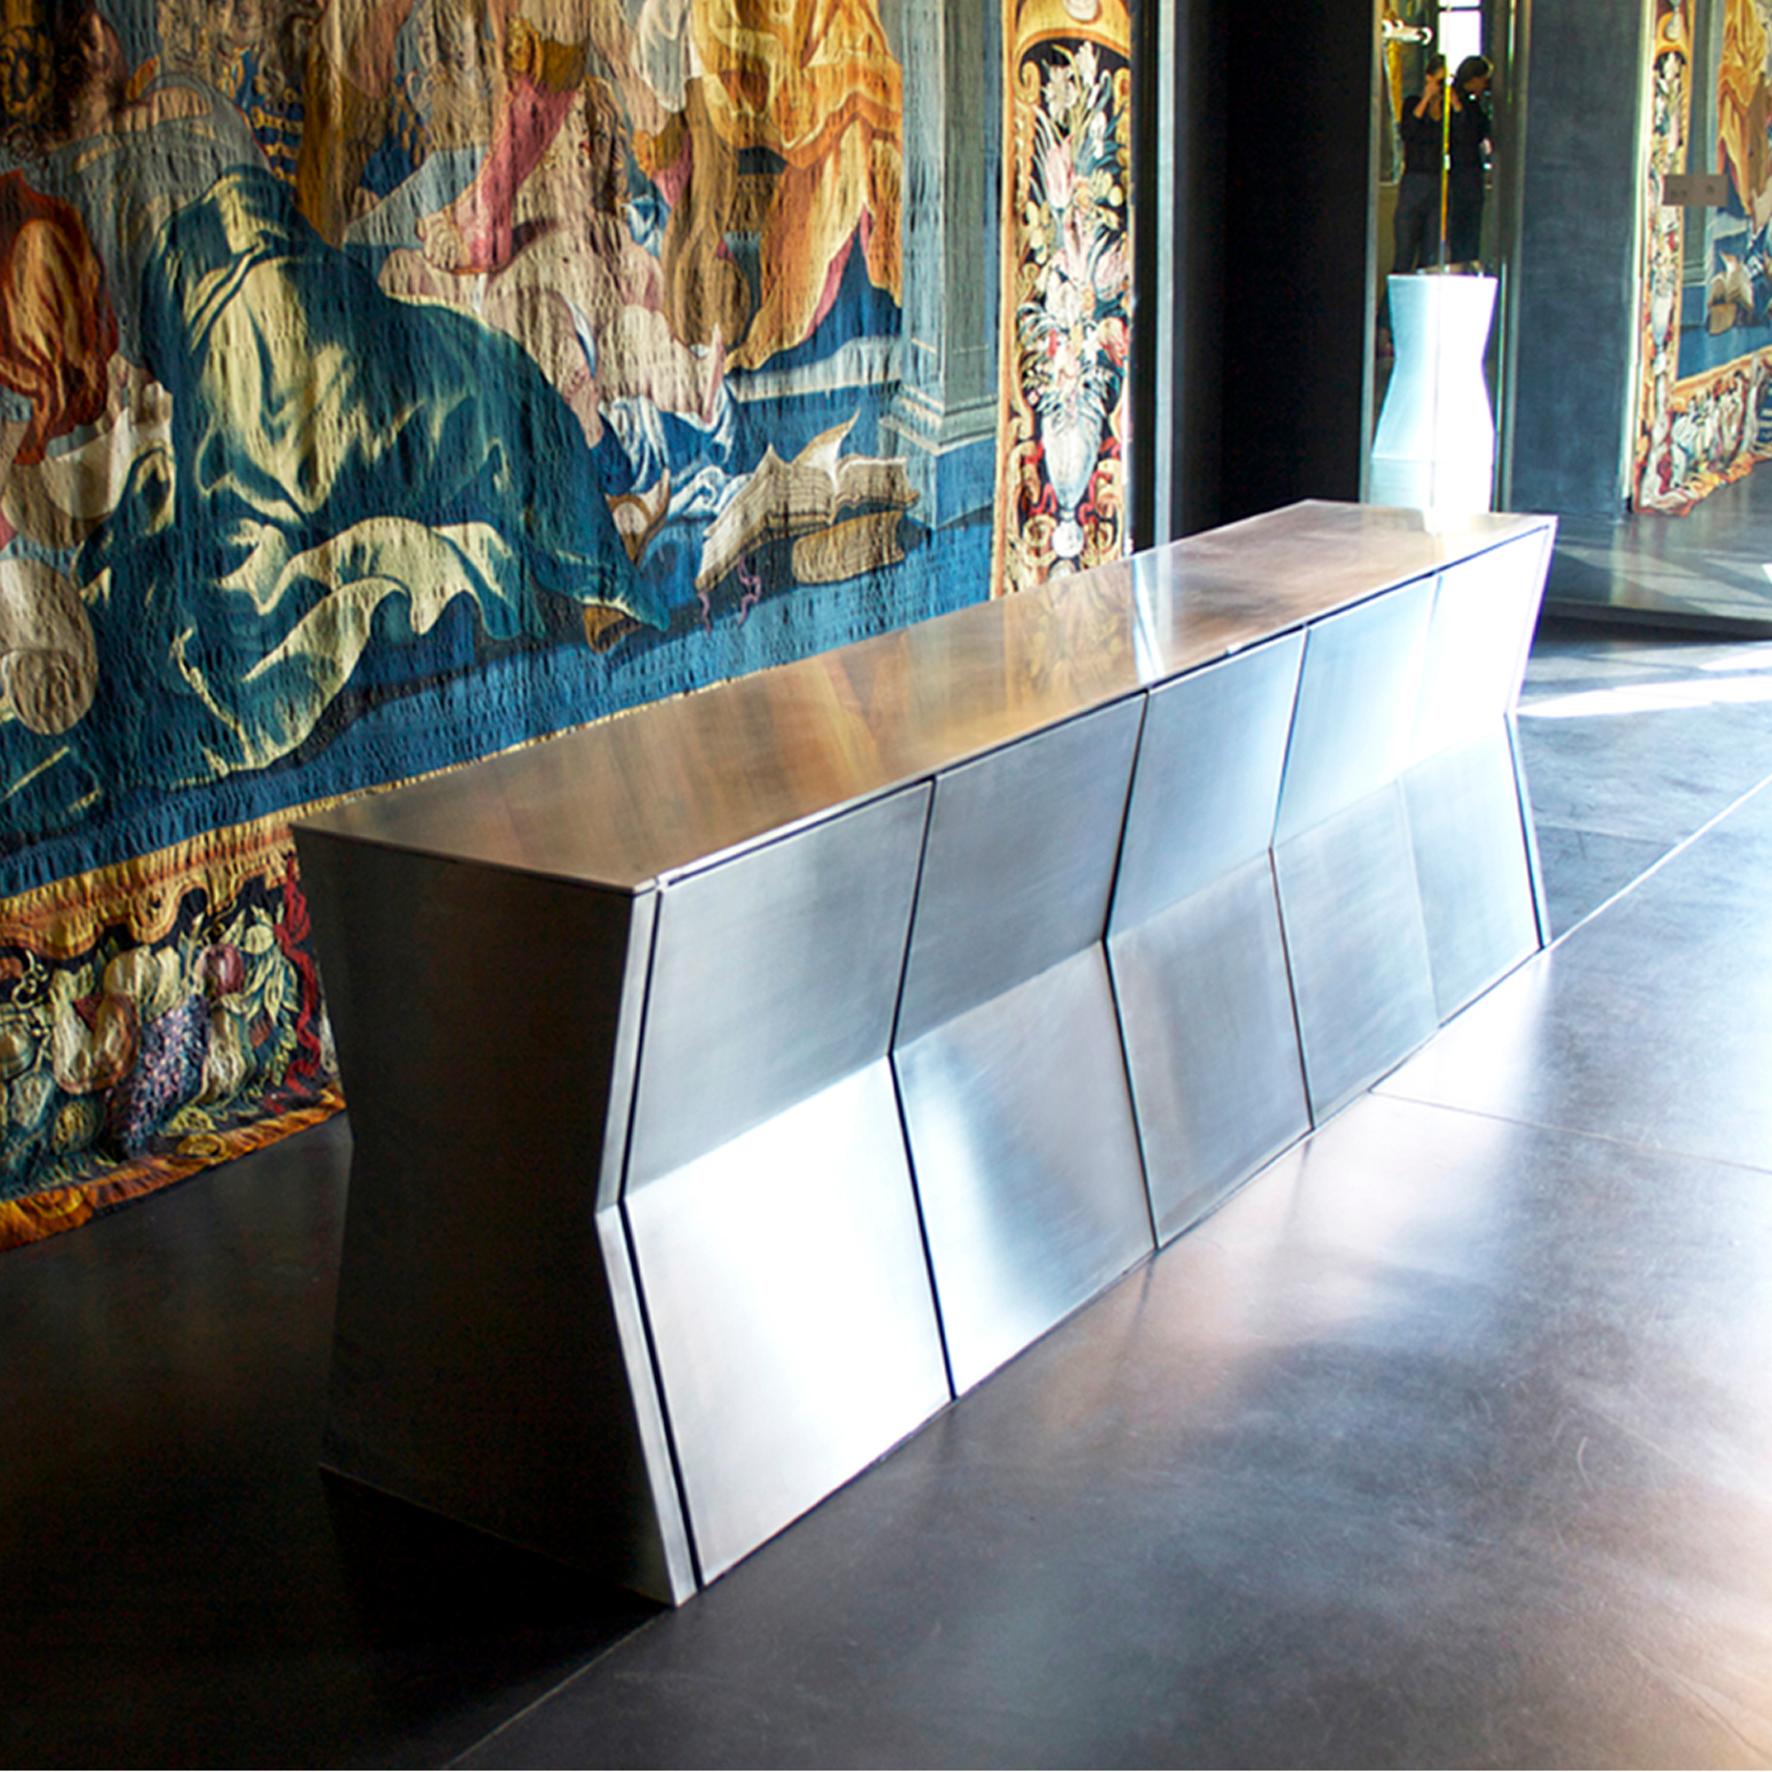 Metalwork Gioia Meller Marcovicz, The Monolith, Dining Table and Chairs For Sale